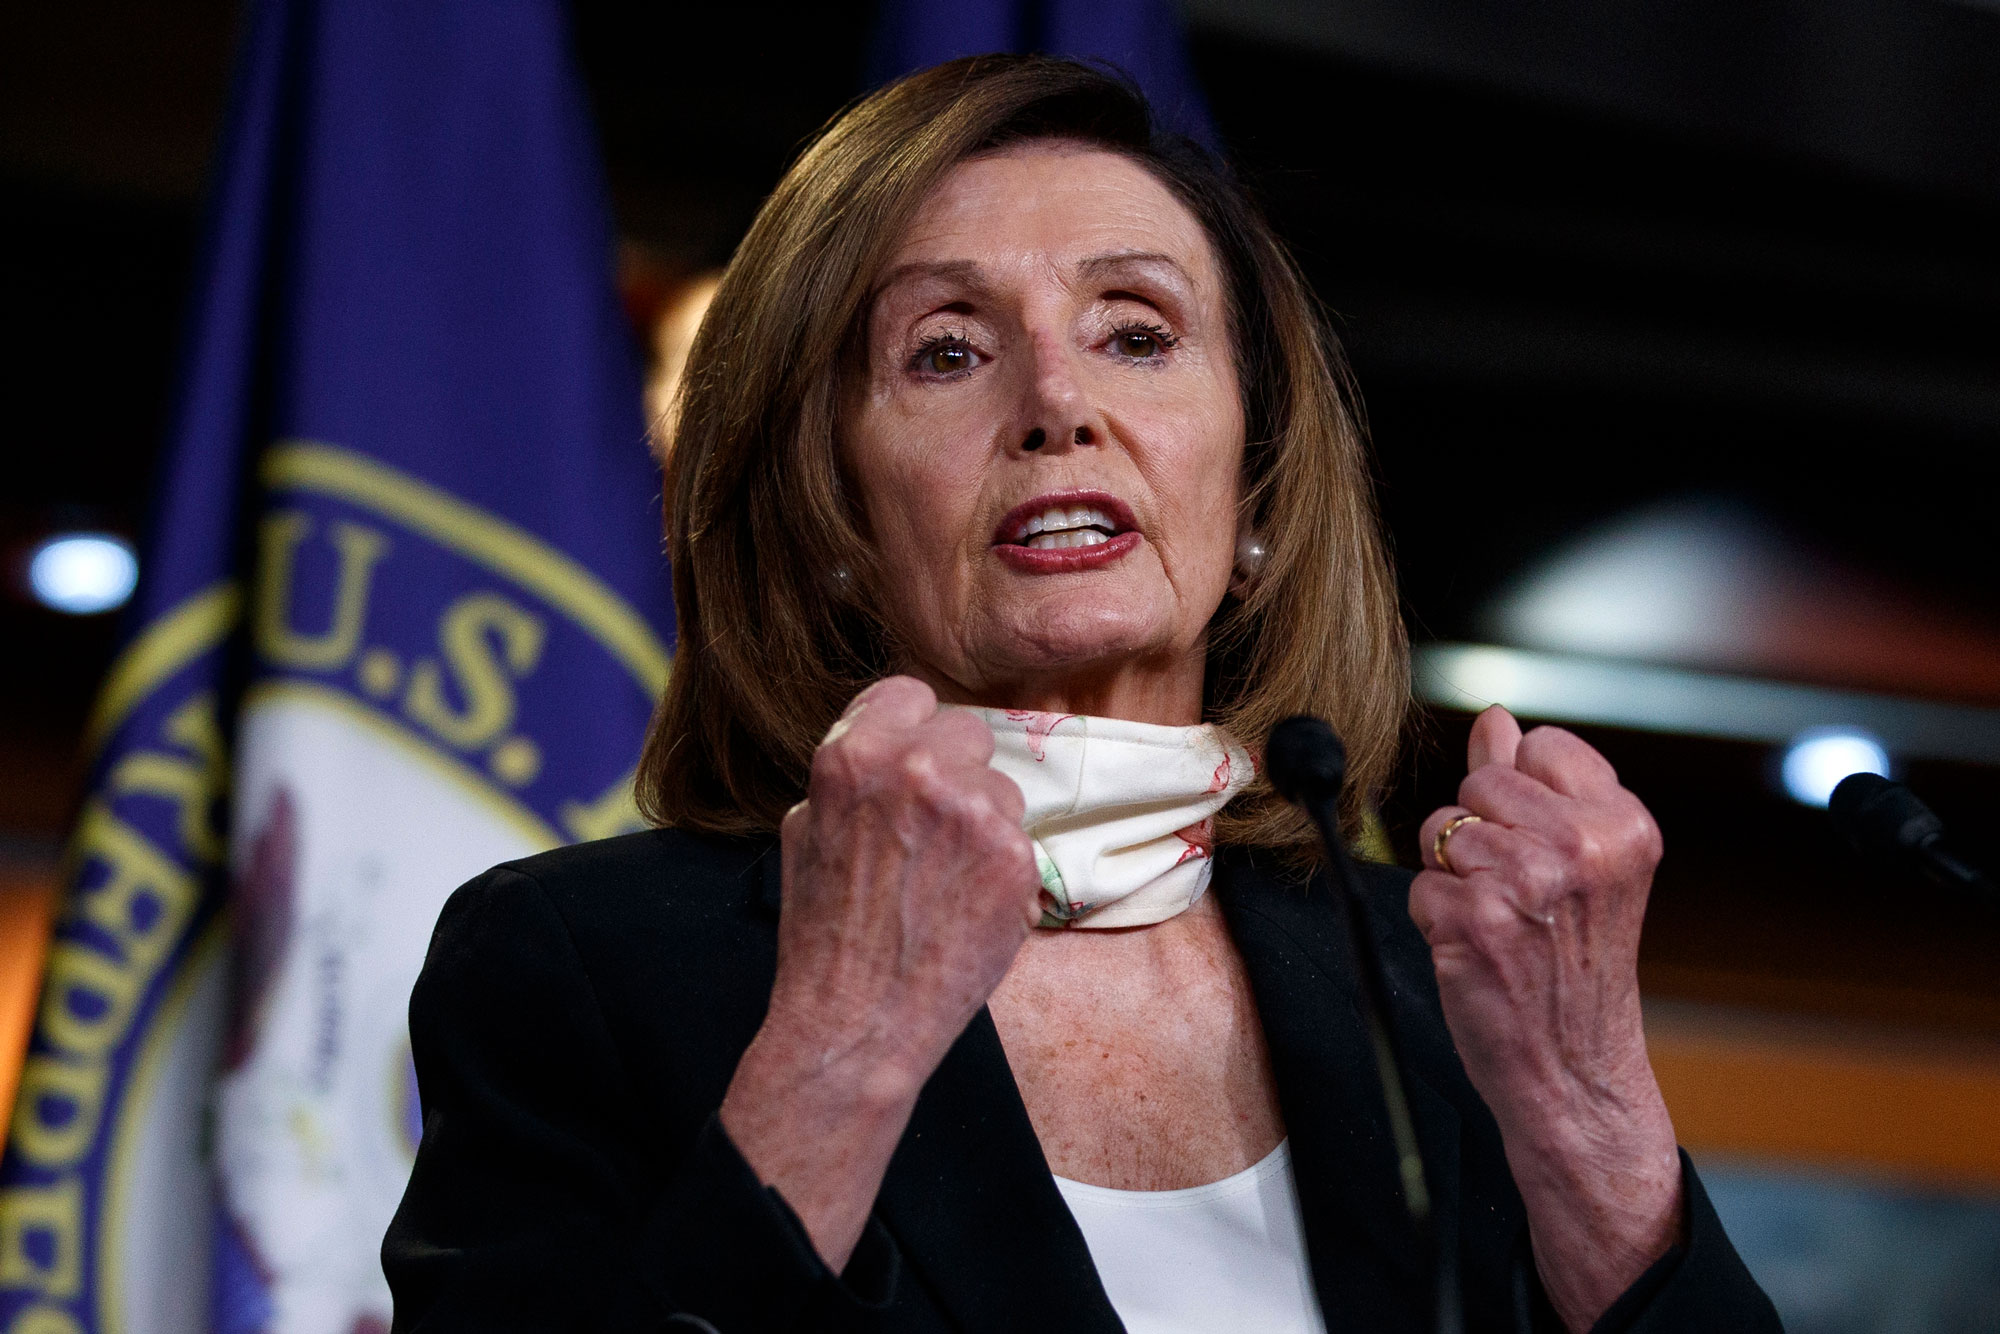 House Speaker Nancy Pelosi of Calif., speaks during a news conference on Capitol Hill in Washington on May 28.